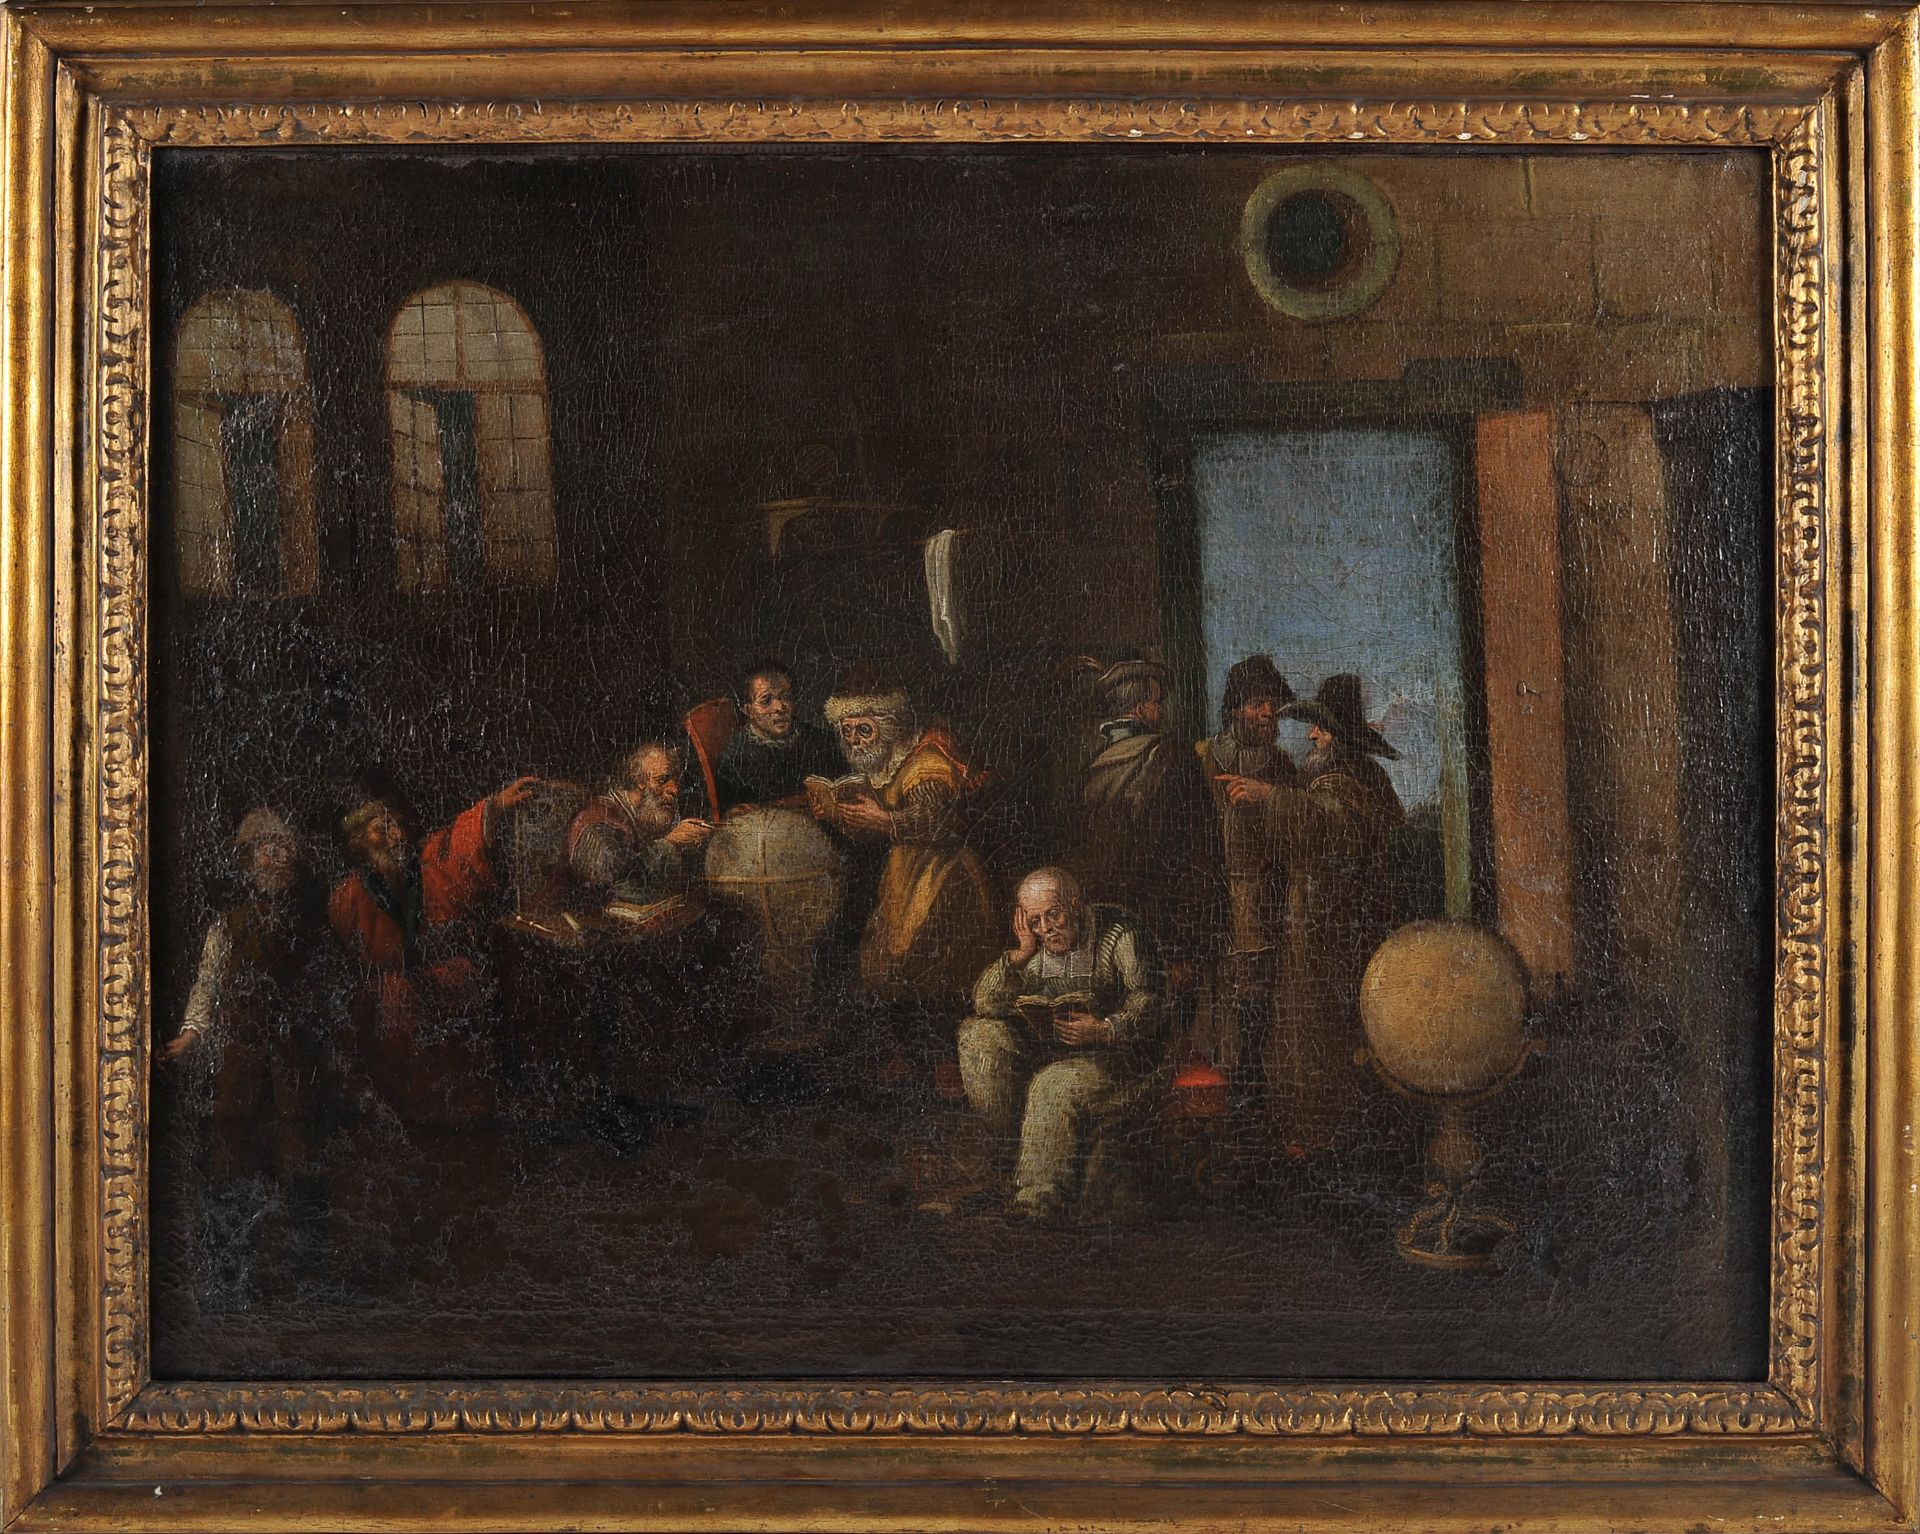 Astronomers meeting inside a palace